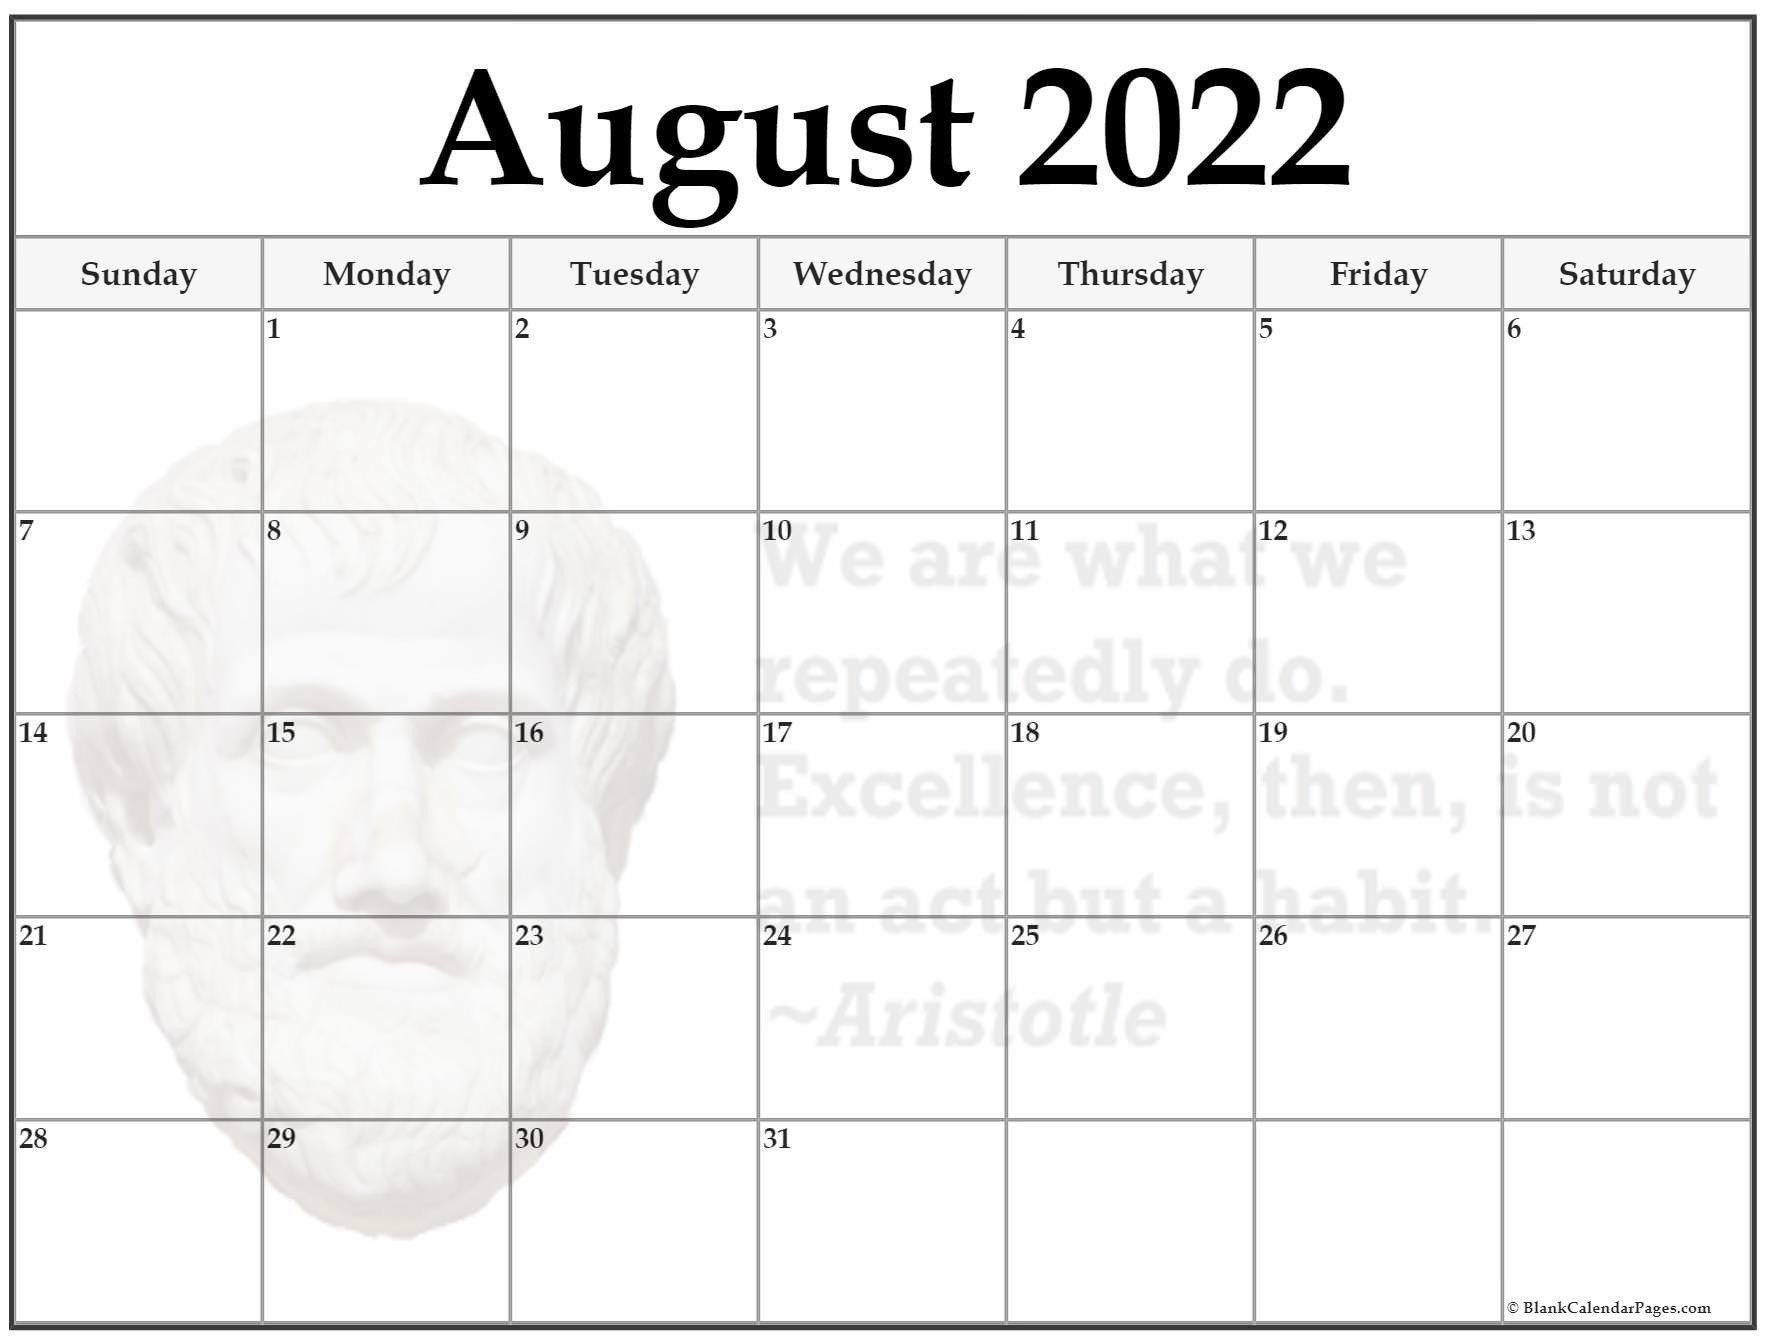 24+ August 2022 Quote Calendars  Printable Calendar 2022 With Quotes